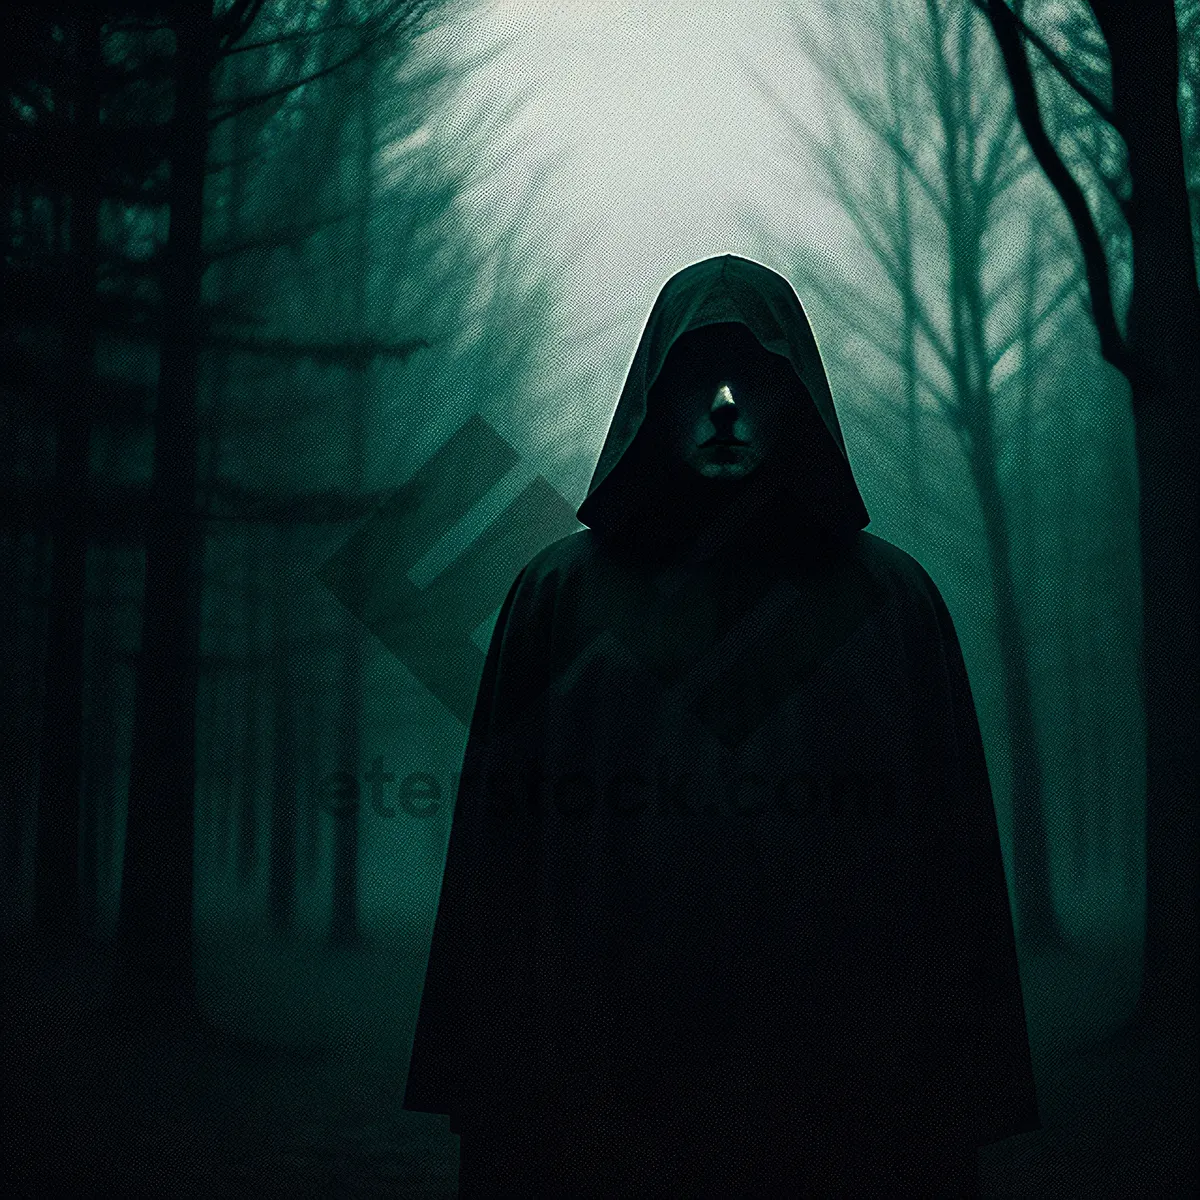 Picture of Dark Cloaked Man: Stylish and Mysterious Fashion Portrait